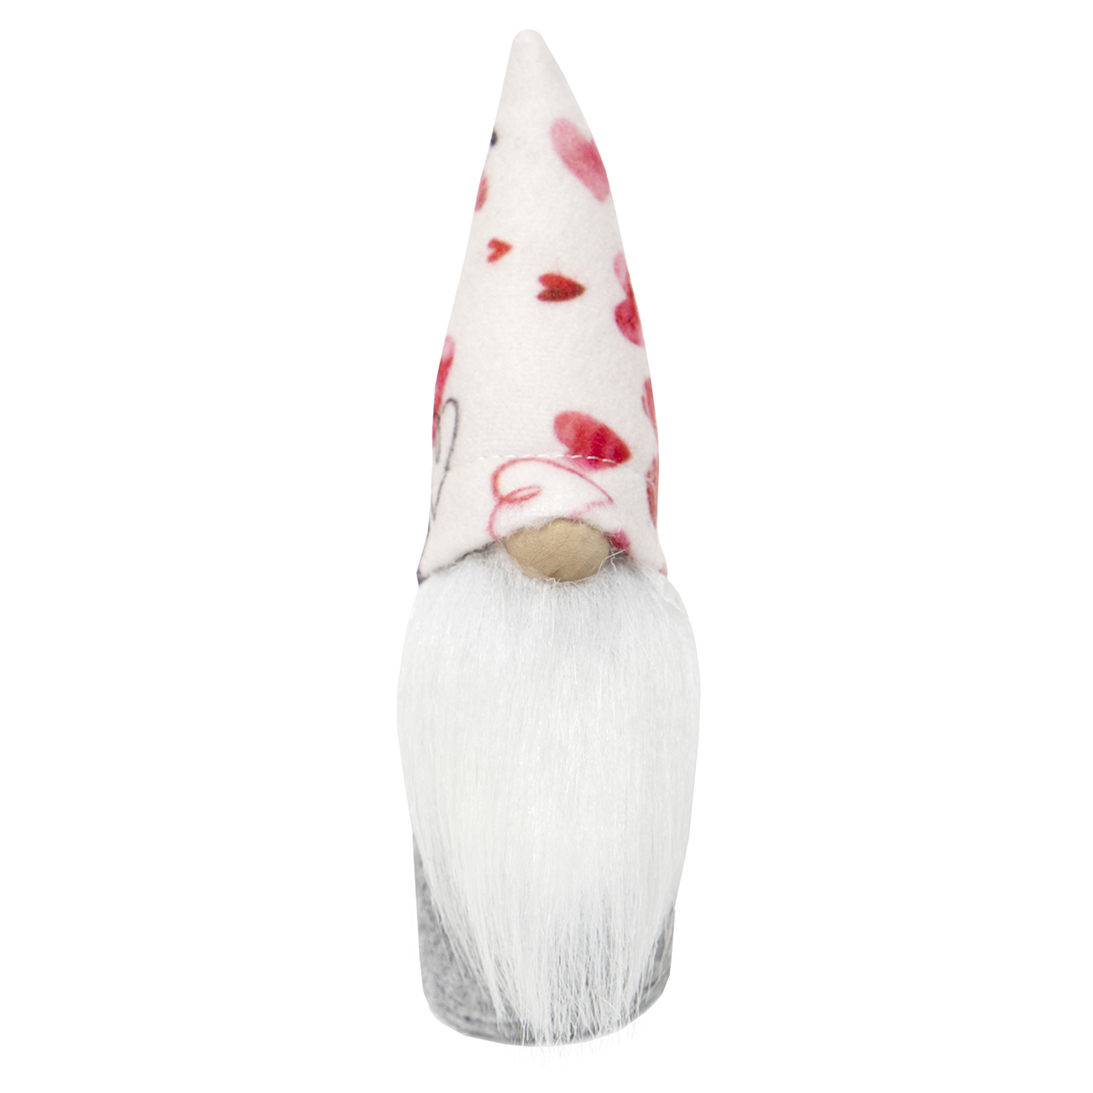 Sir Heartsalot Gnome with Wood Nose